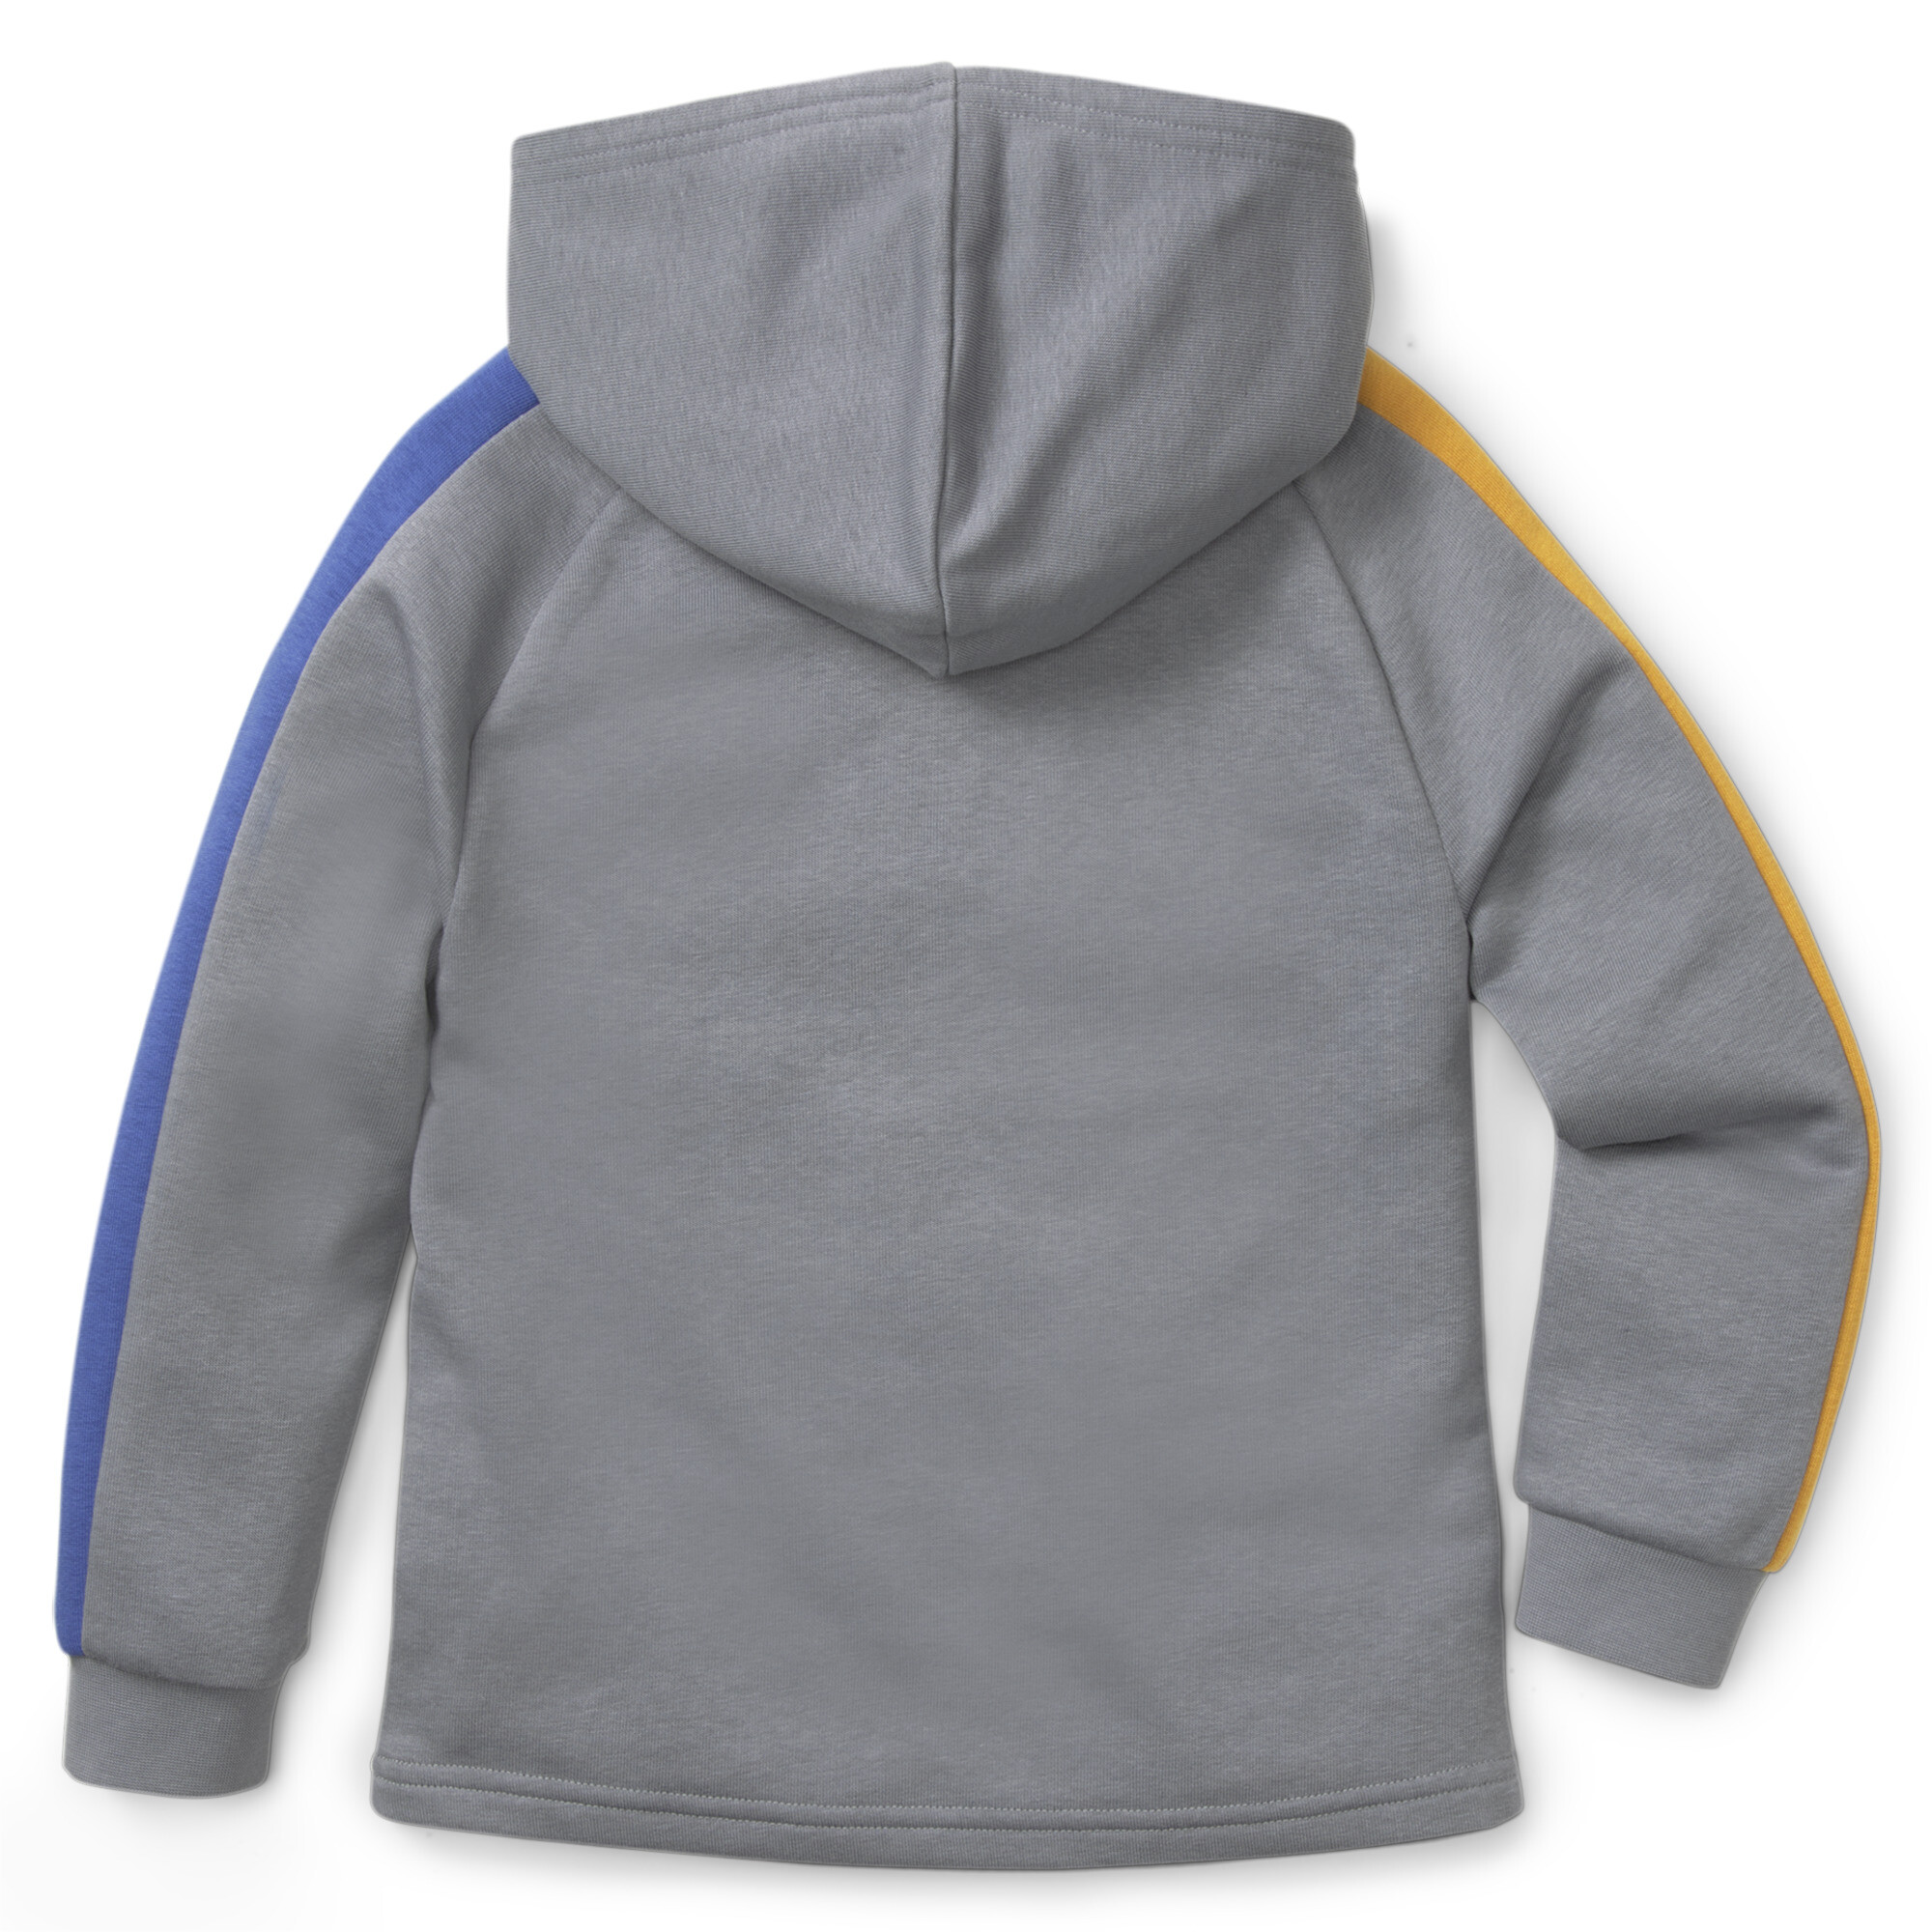 PUMA MATES T7 Hoodie Kids In Gray, Size 1-2 Youth